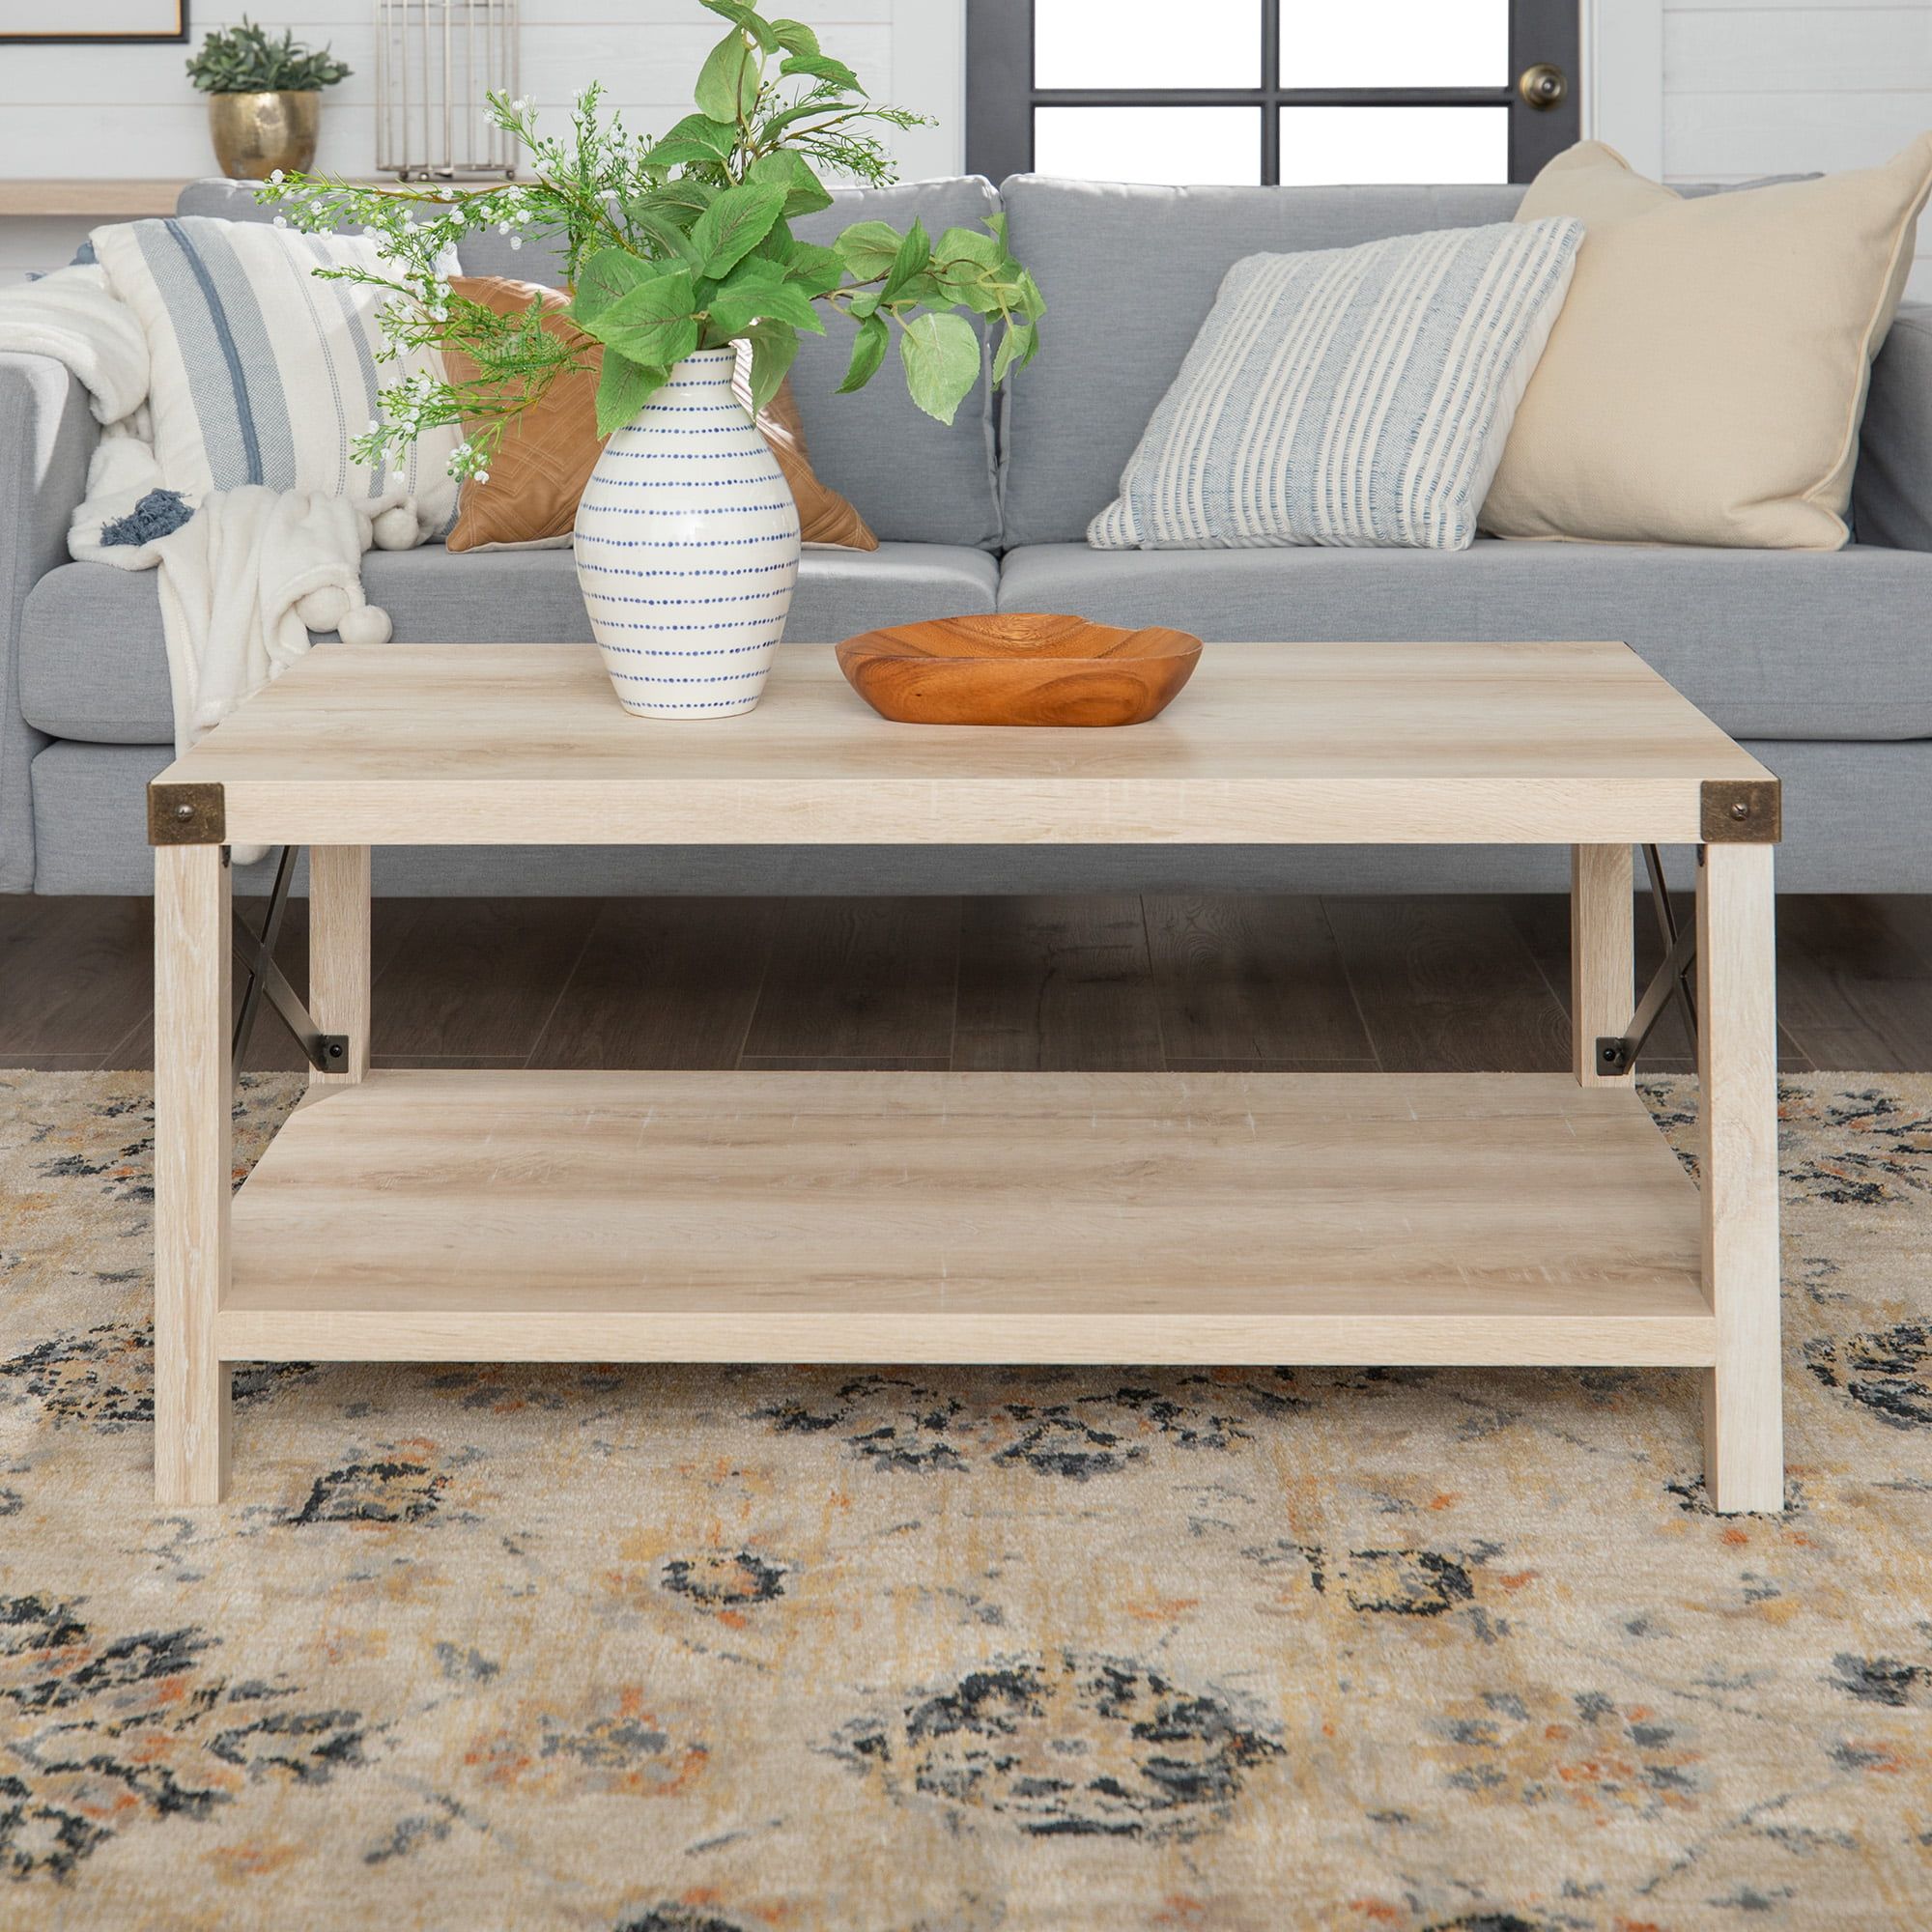 Manor Park 3 Piece Rustic Wood & Metal Coffee Table Set – White Oak Pertaining To Rustic Coffee Tables (View 18 of 20)